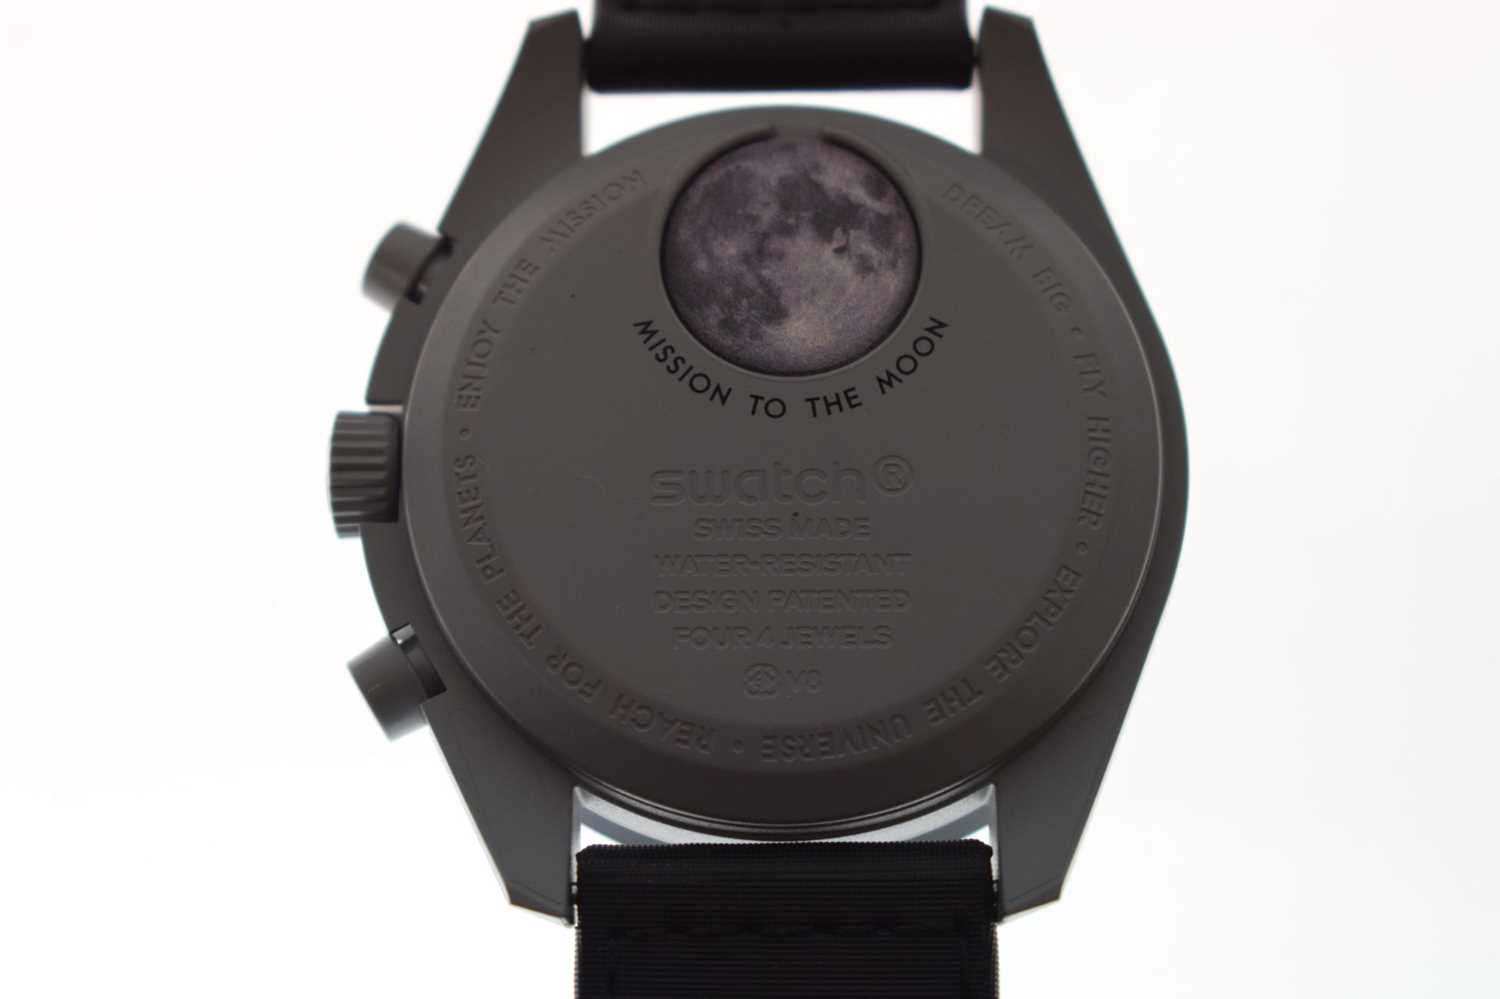 Swatch Omega Speedmaster - Gentleman's 'Mission to the Moon' wristwatch - Image 6 of 9